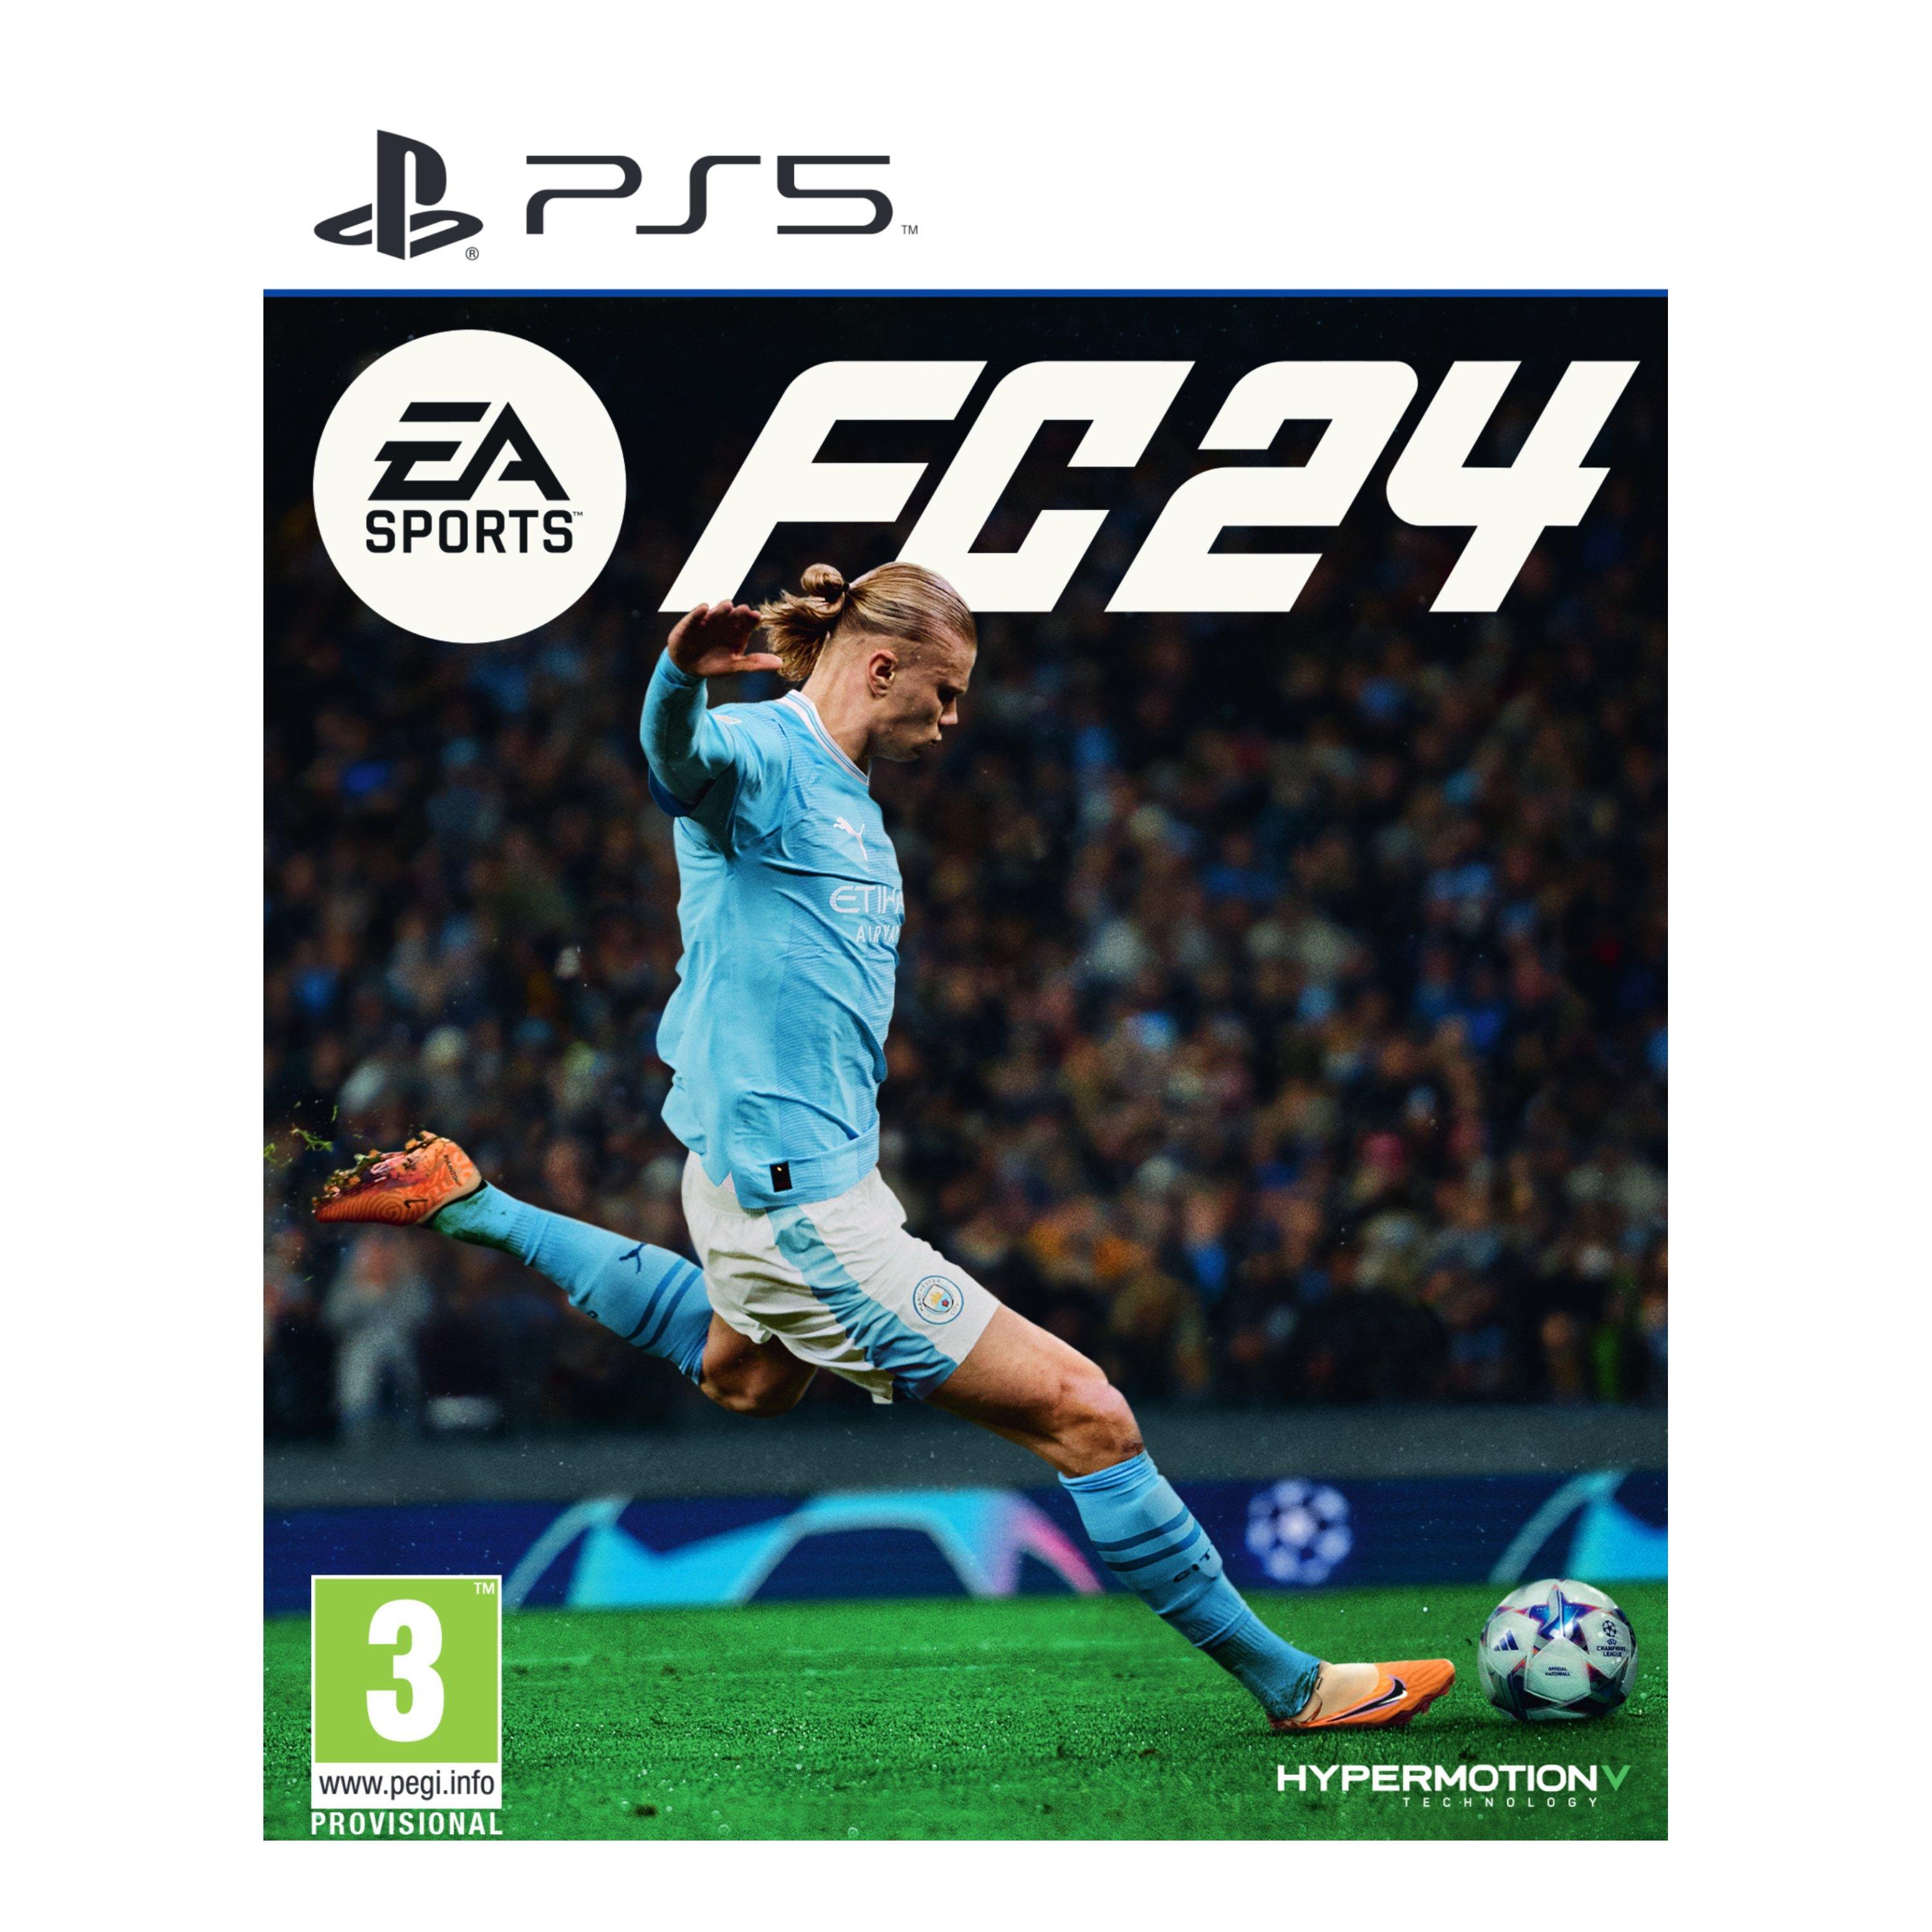 Buy Ea sports fc 24 - playstation 5 game in Kuwait